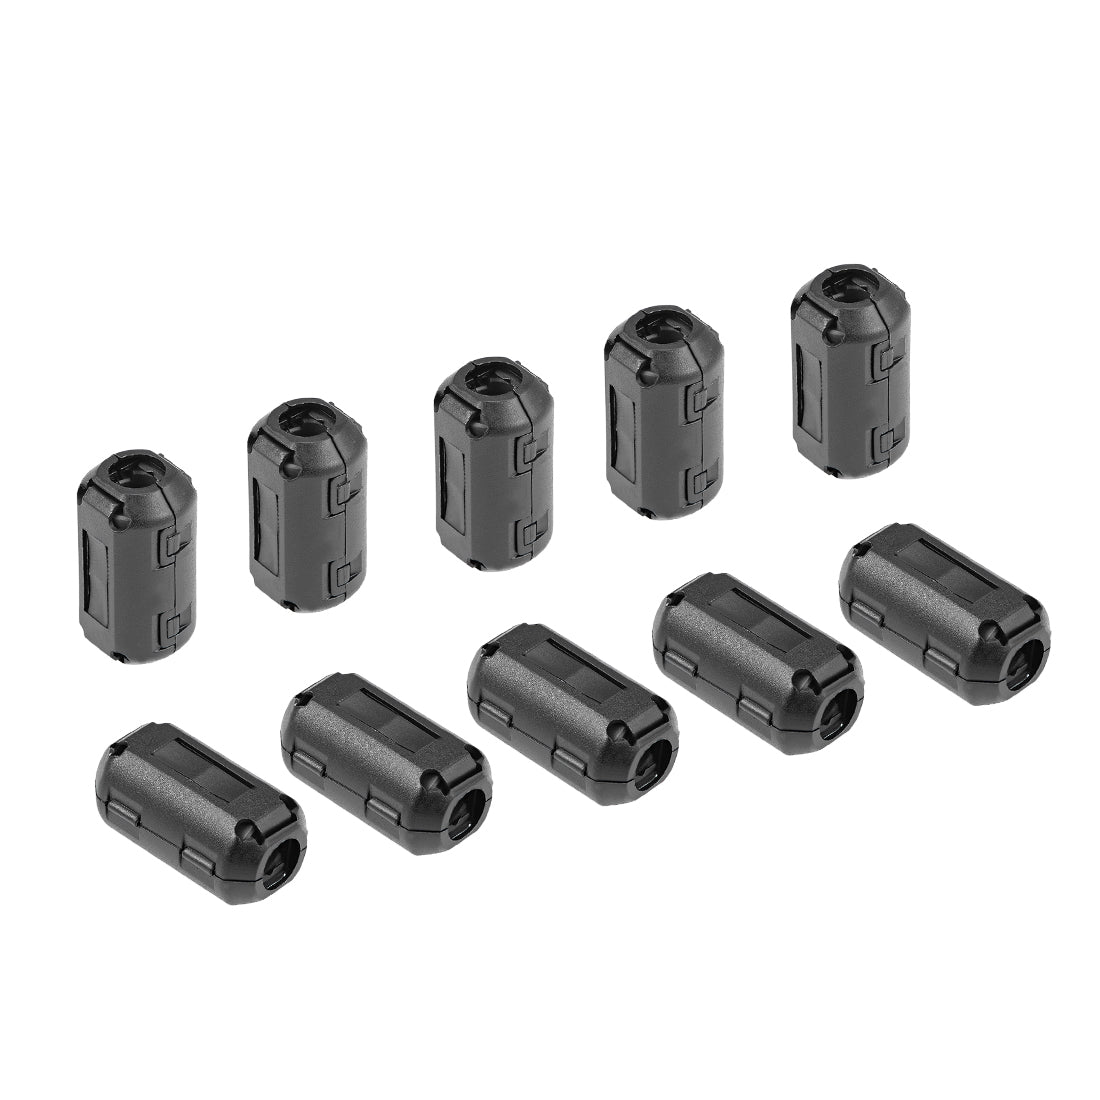 uxcell Uxcell 9mm Ferrite Cores Ring Clip-On RFI EMI Noise Suppression Filter Cable Clip, Black 10pcs